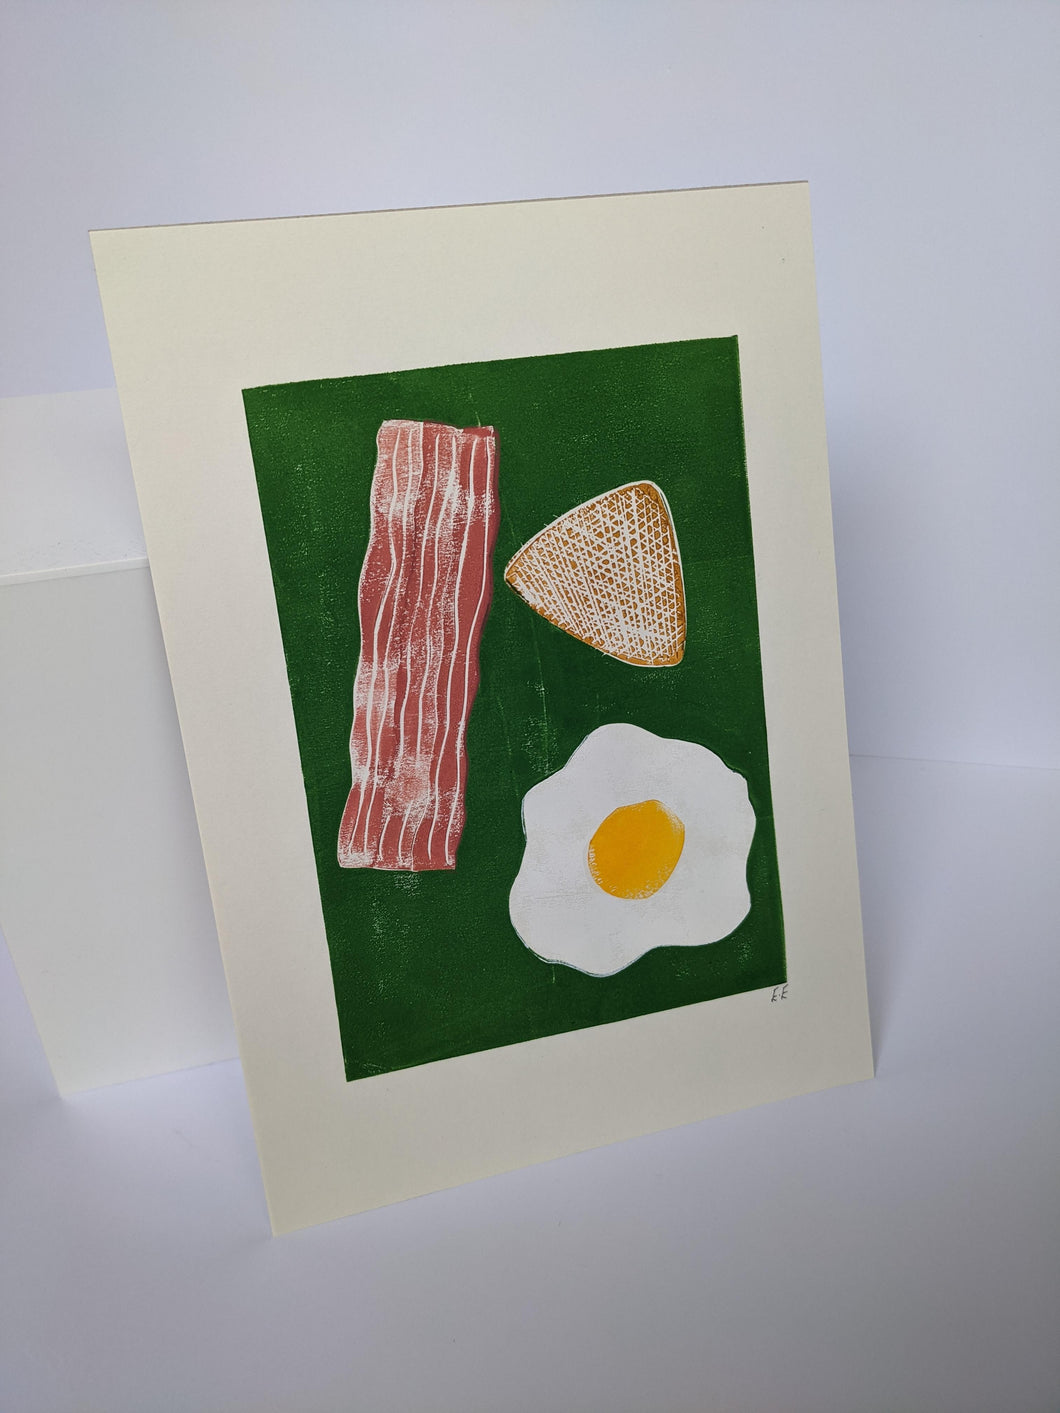 A Full English print in green with a fried egg, bacon and hash brown